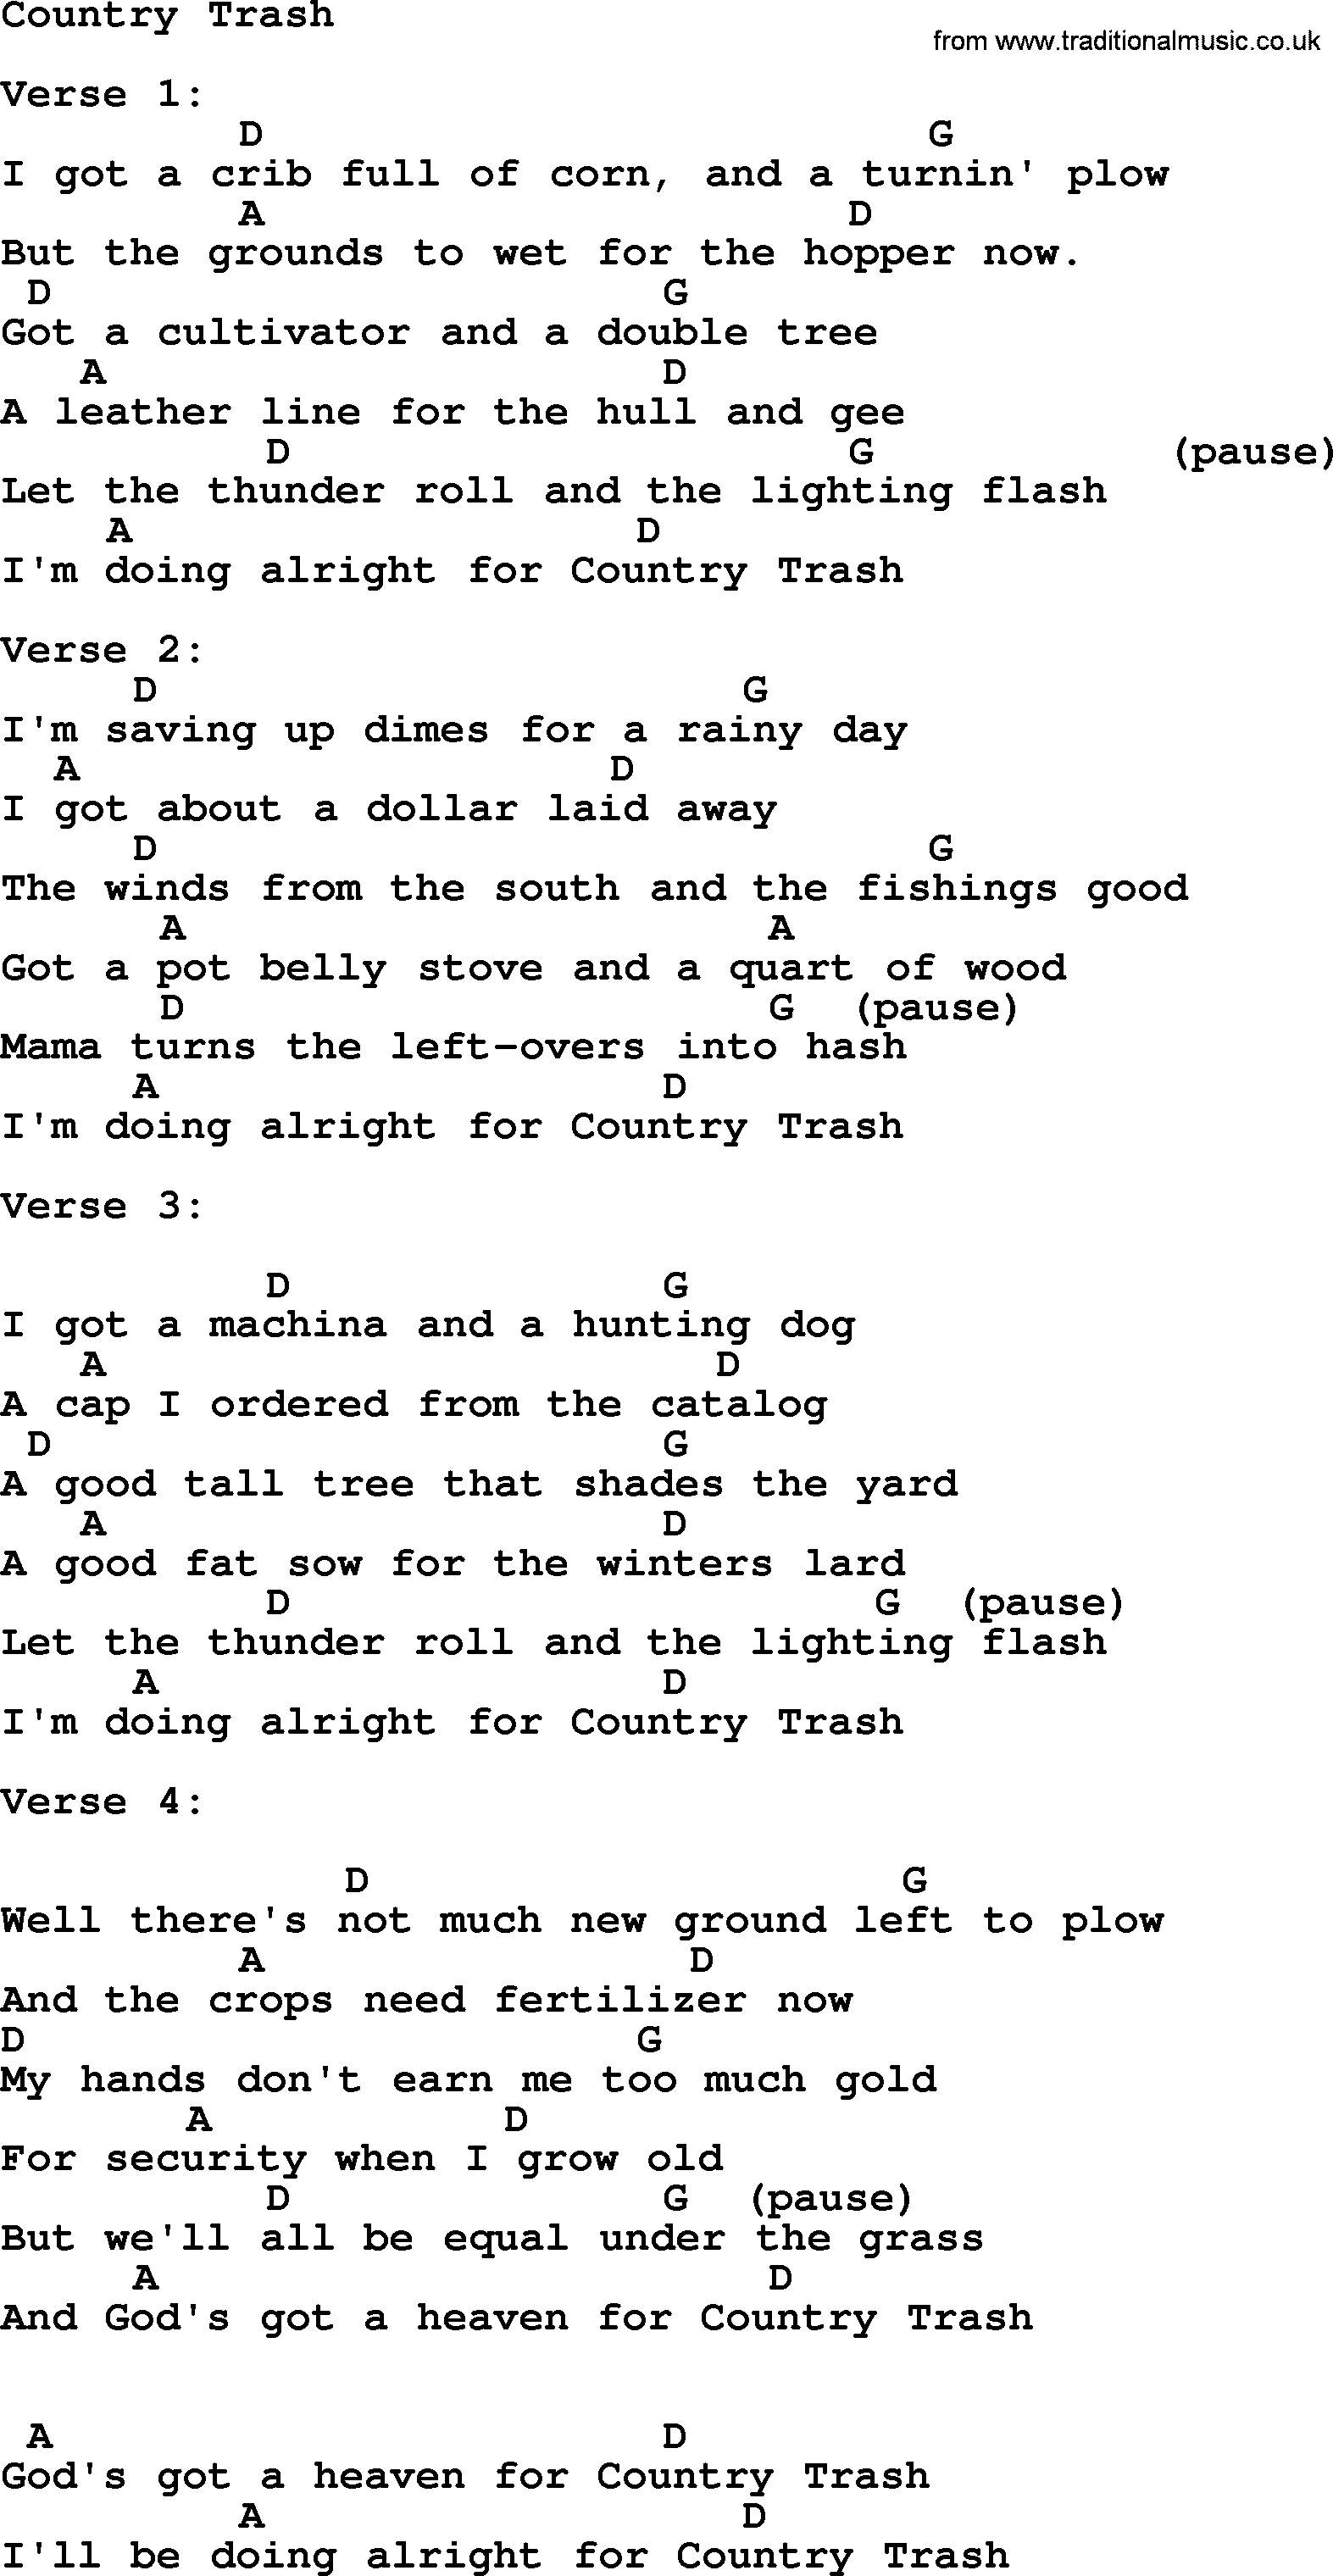 Johnny Cash song Country Trash, lyrics and chords